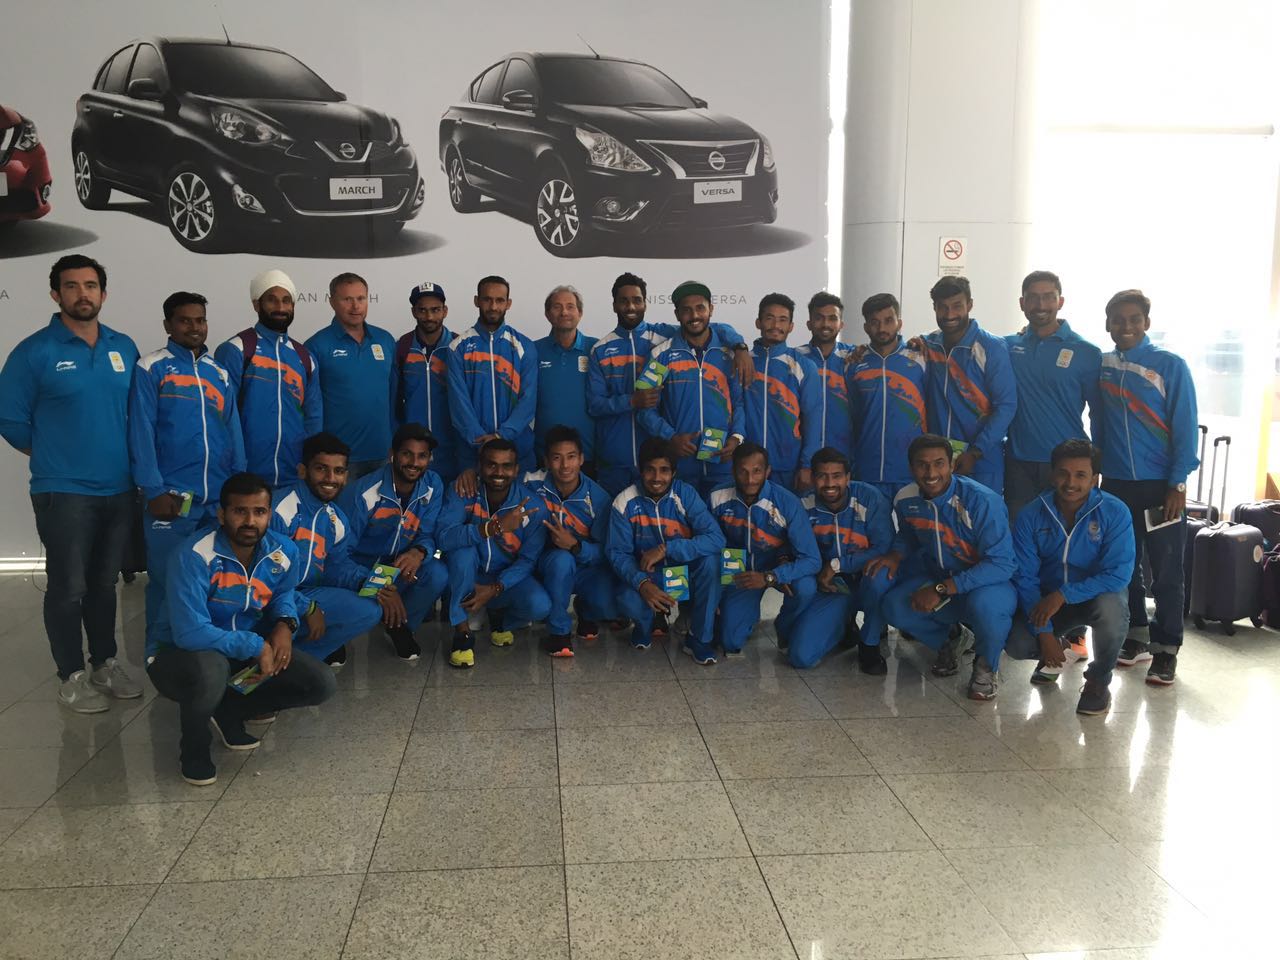 Eyeing glory, Indian hockey teams arrive in Rio for 2016 Olympic Games